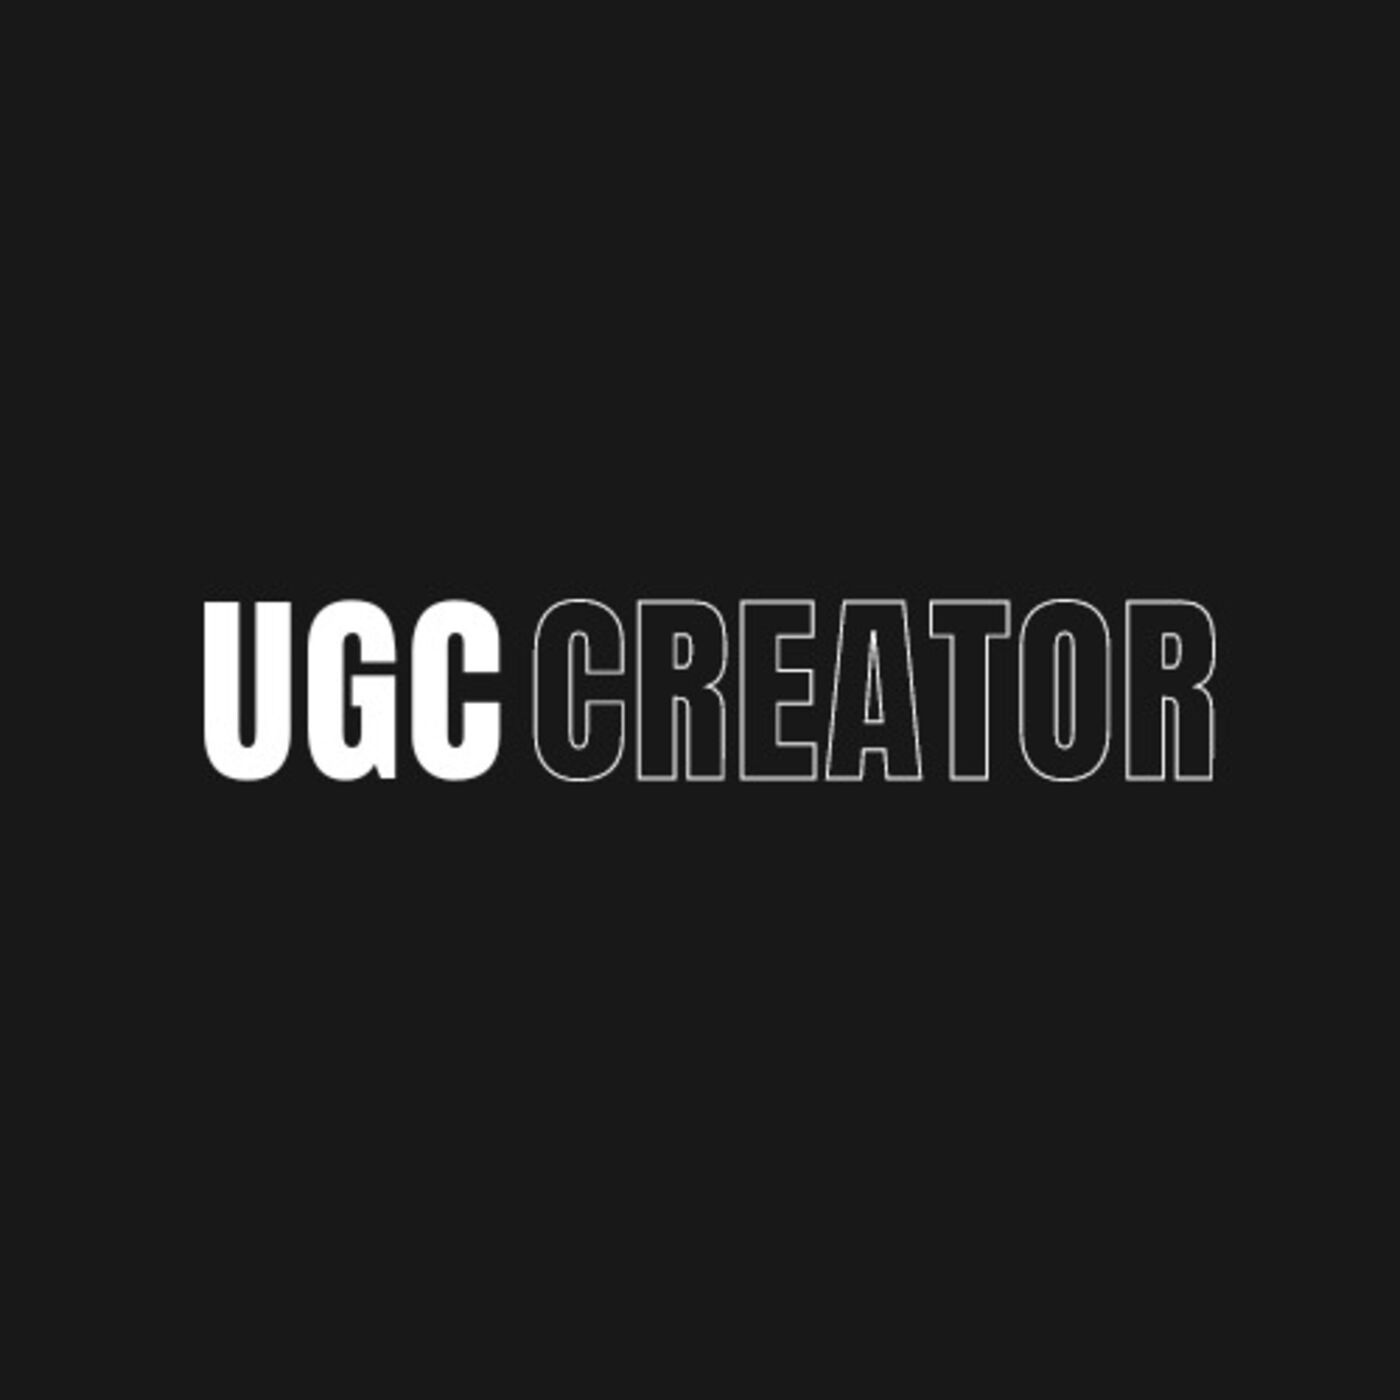 Our First UGC Creator Webseminar! by vctr